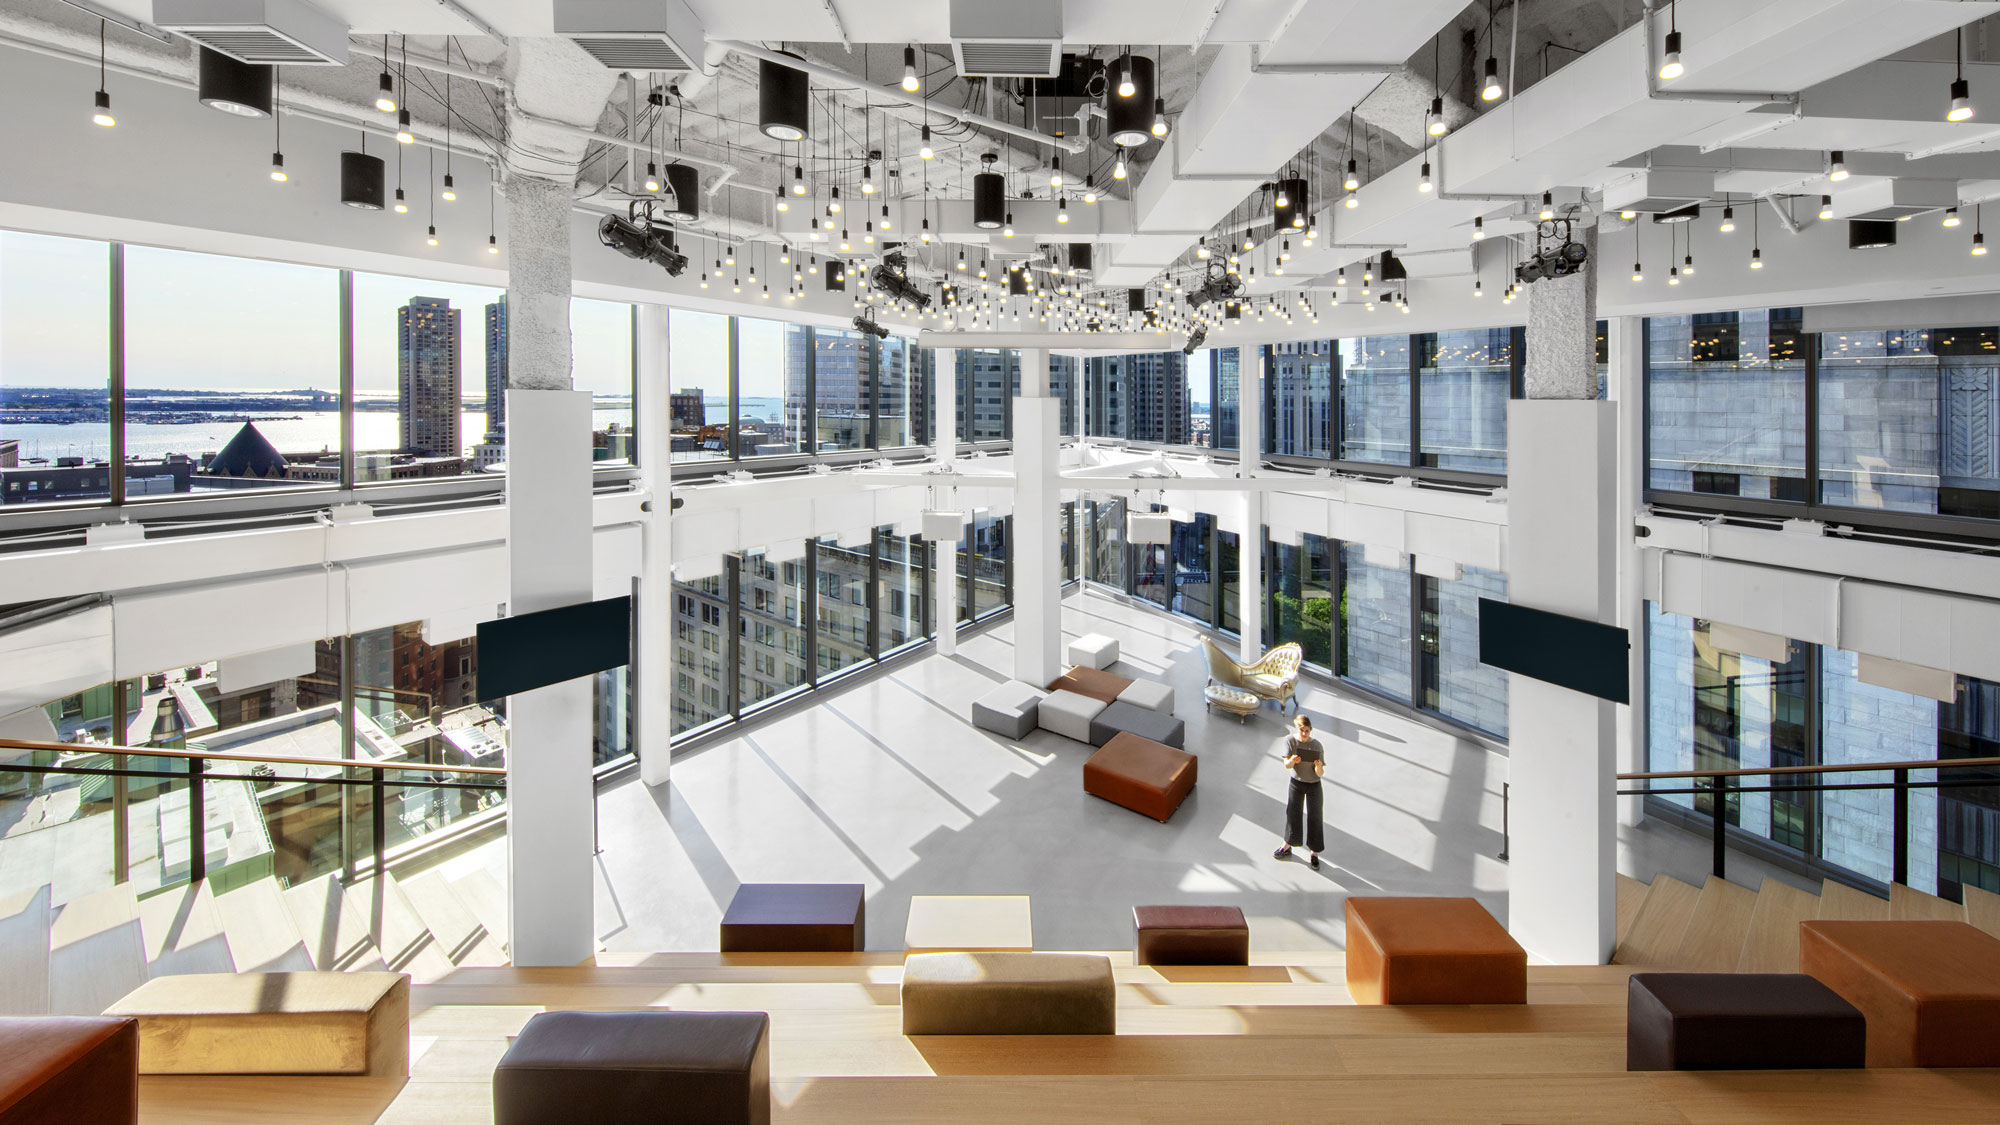 Grand two-story amphitheatre of reception at Publicis Groupe with views of Boston Harbor